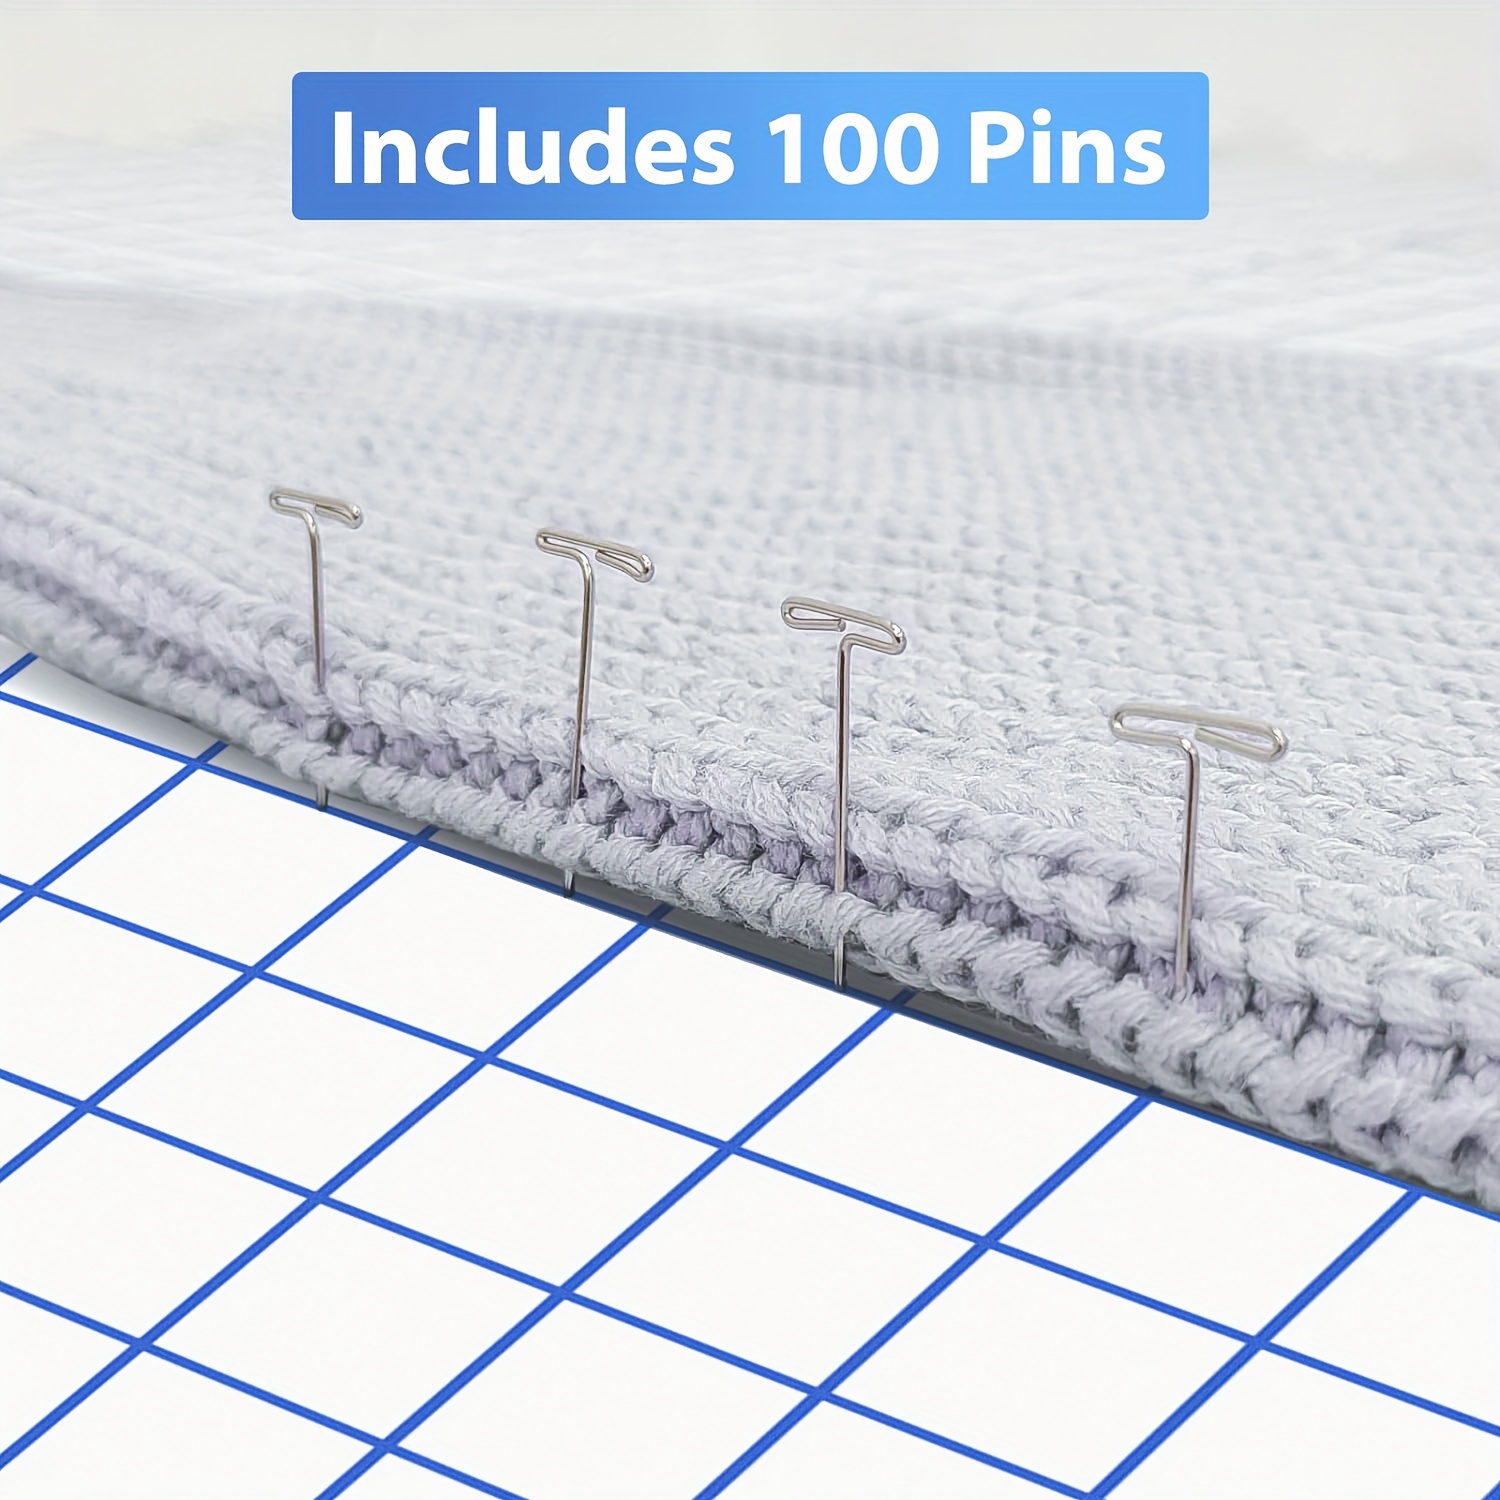 Knitiq Blocking Mats for Crochet - Extra Thick Crochet Blocking Boards for Crochet, Lace & Needlepoint Projects with 100 T Pins